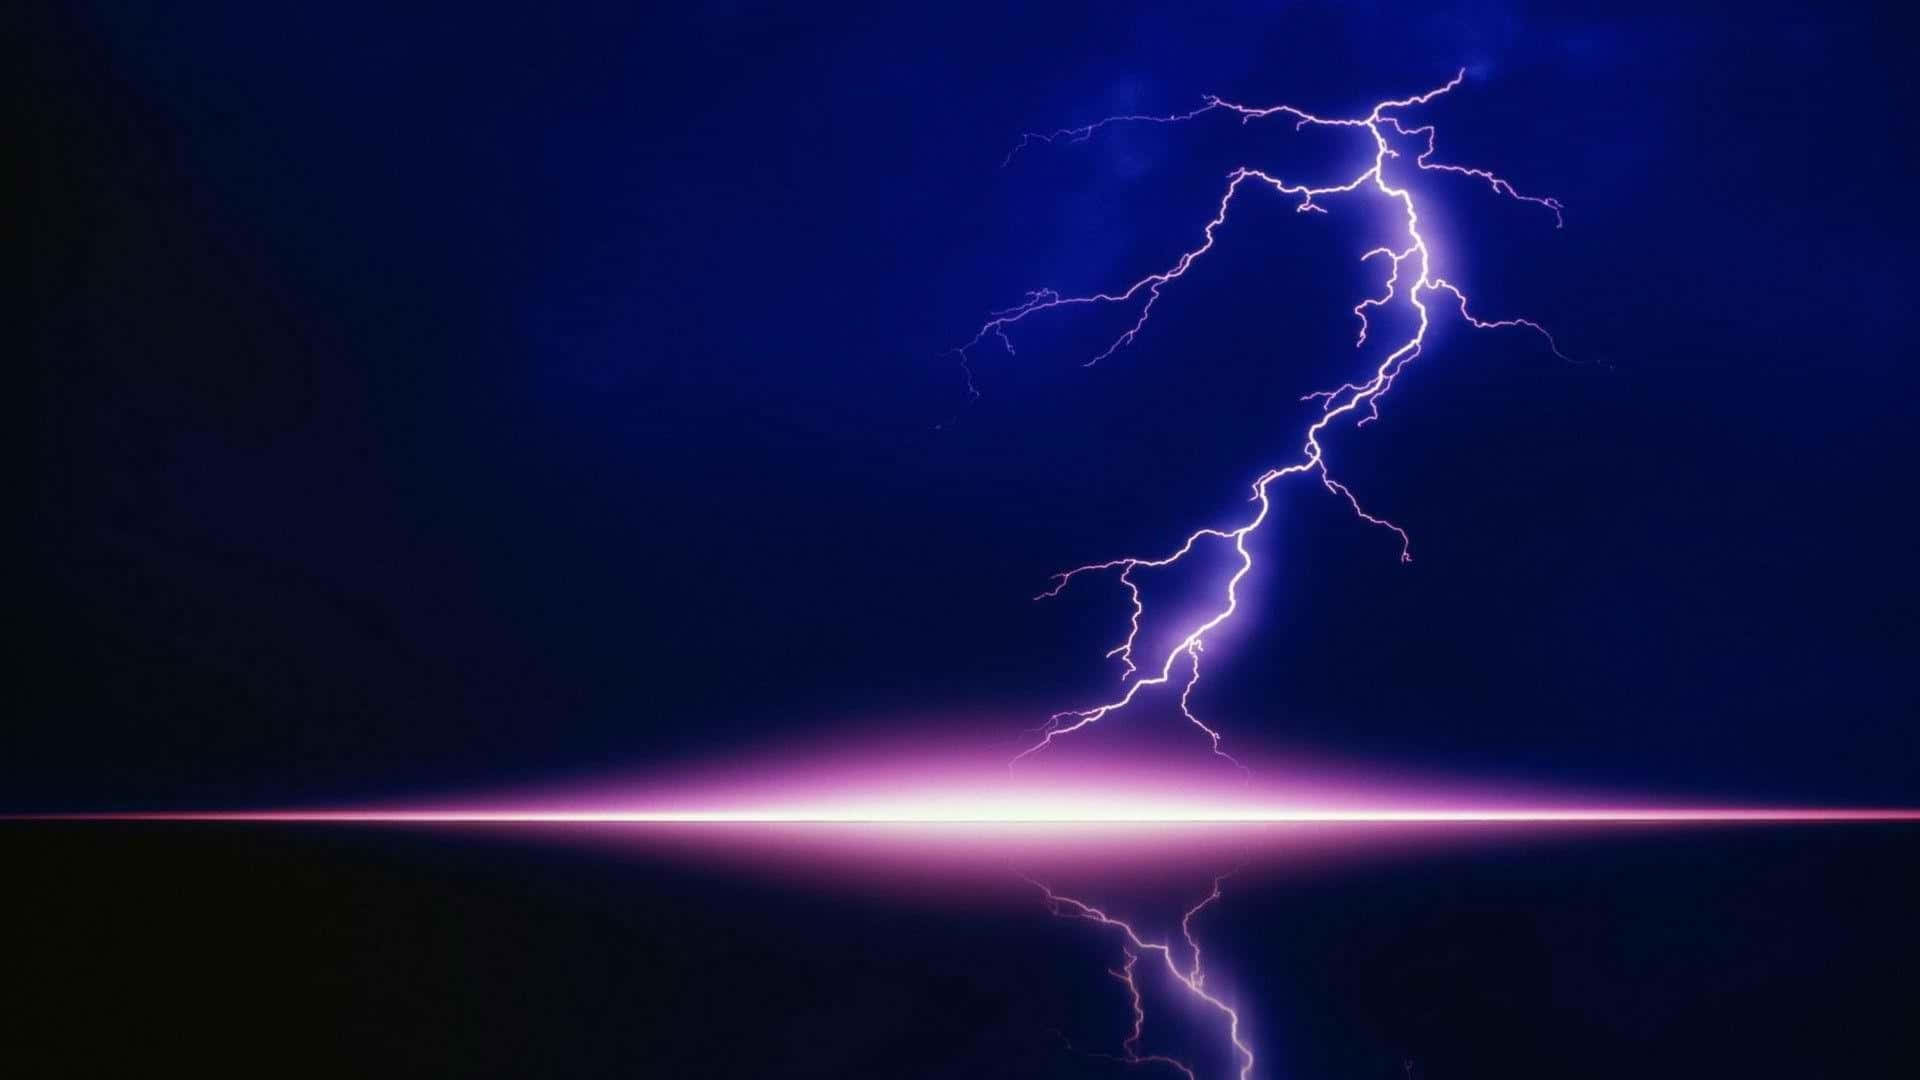 Witness the majesty of blue lightning in this stunning image. Wallpaper